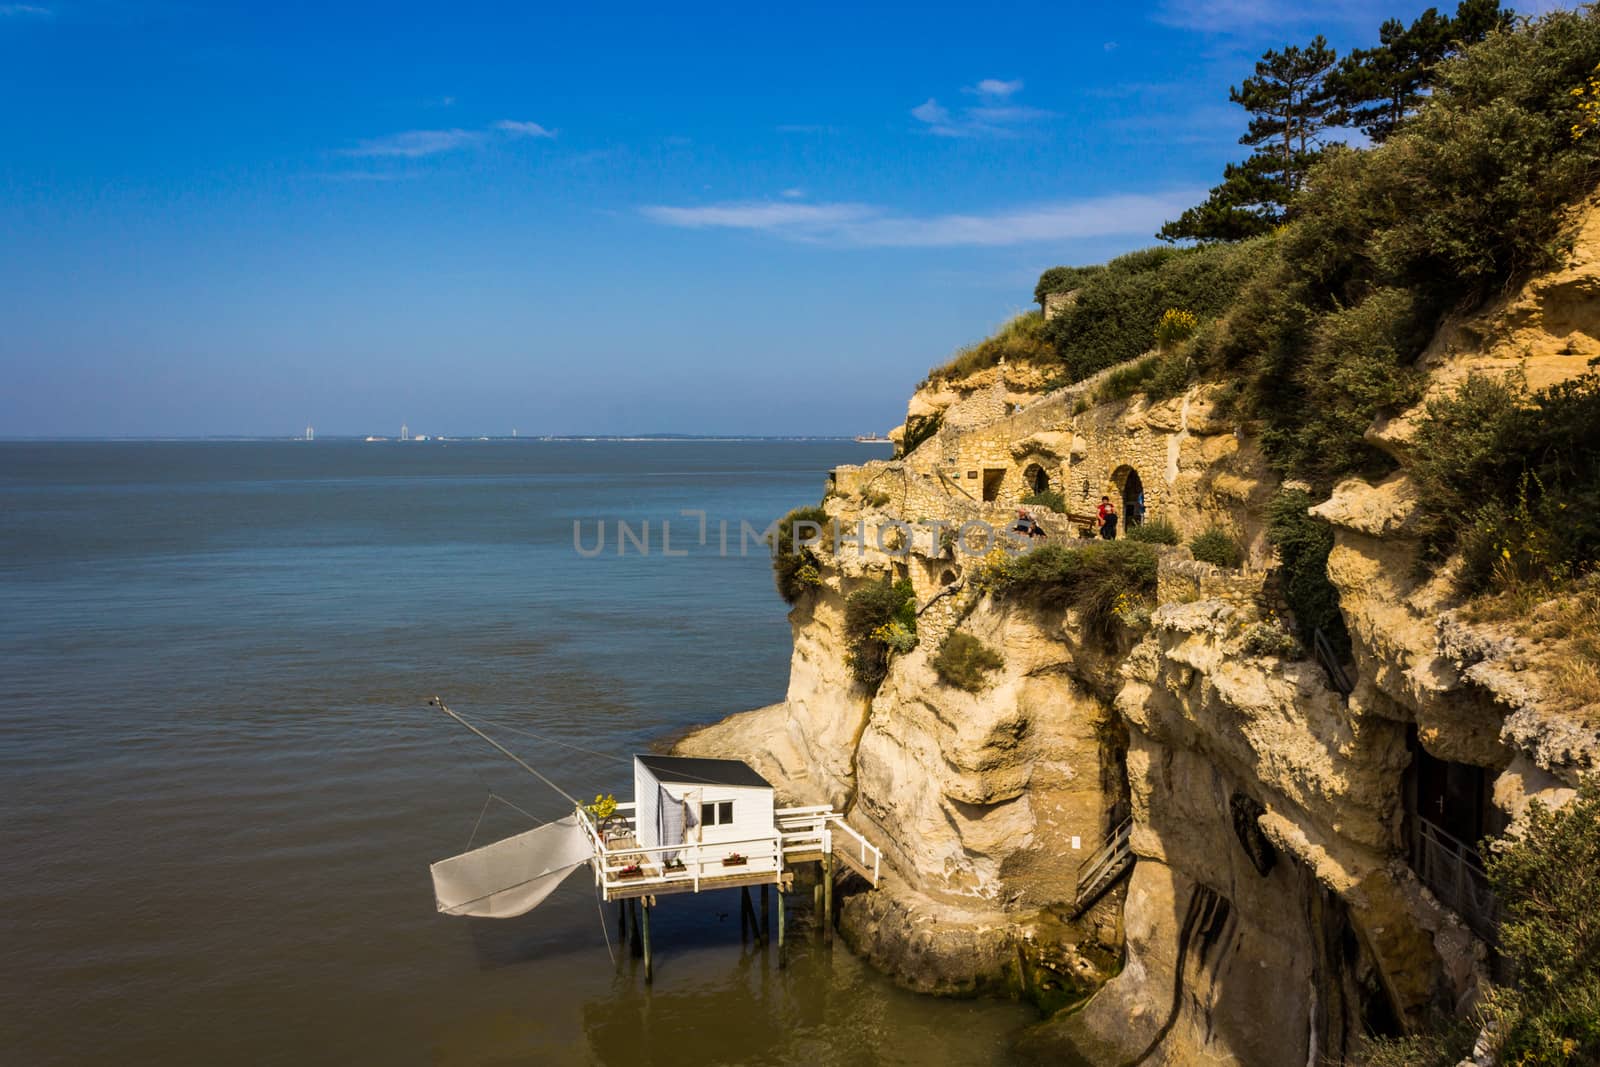 A white fishing hut next to some old walkways that cut through the cliffs